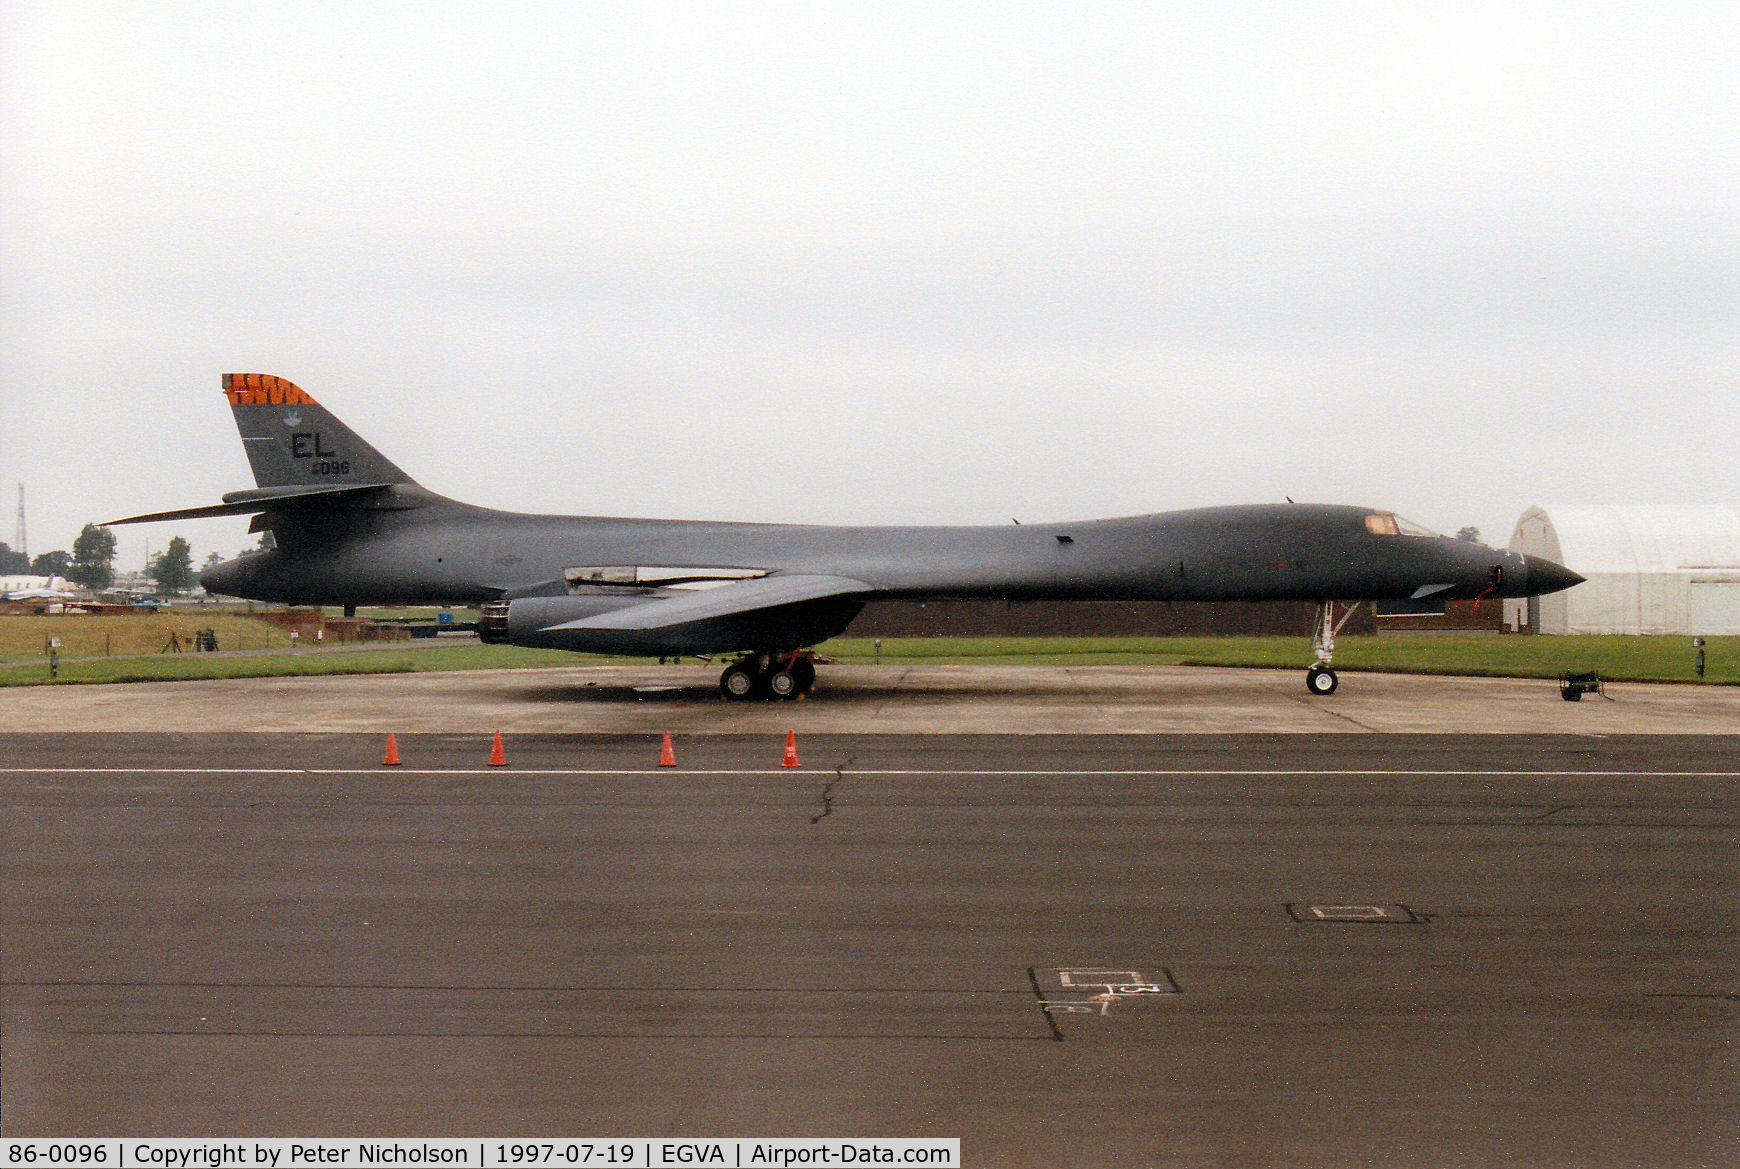 86-0096, 1986 Rockwell B-1B Lancer C/N 56, B-1B Lancer, callsign Tiger 02, of 37th Bomb Squadron/28th Bombardment Wing at Ellsworth AFB on the flight-line at the 1997 Intnl Air Tattoo at RAF Fairford.